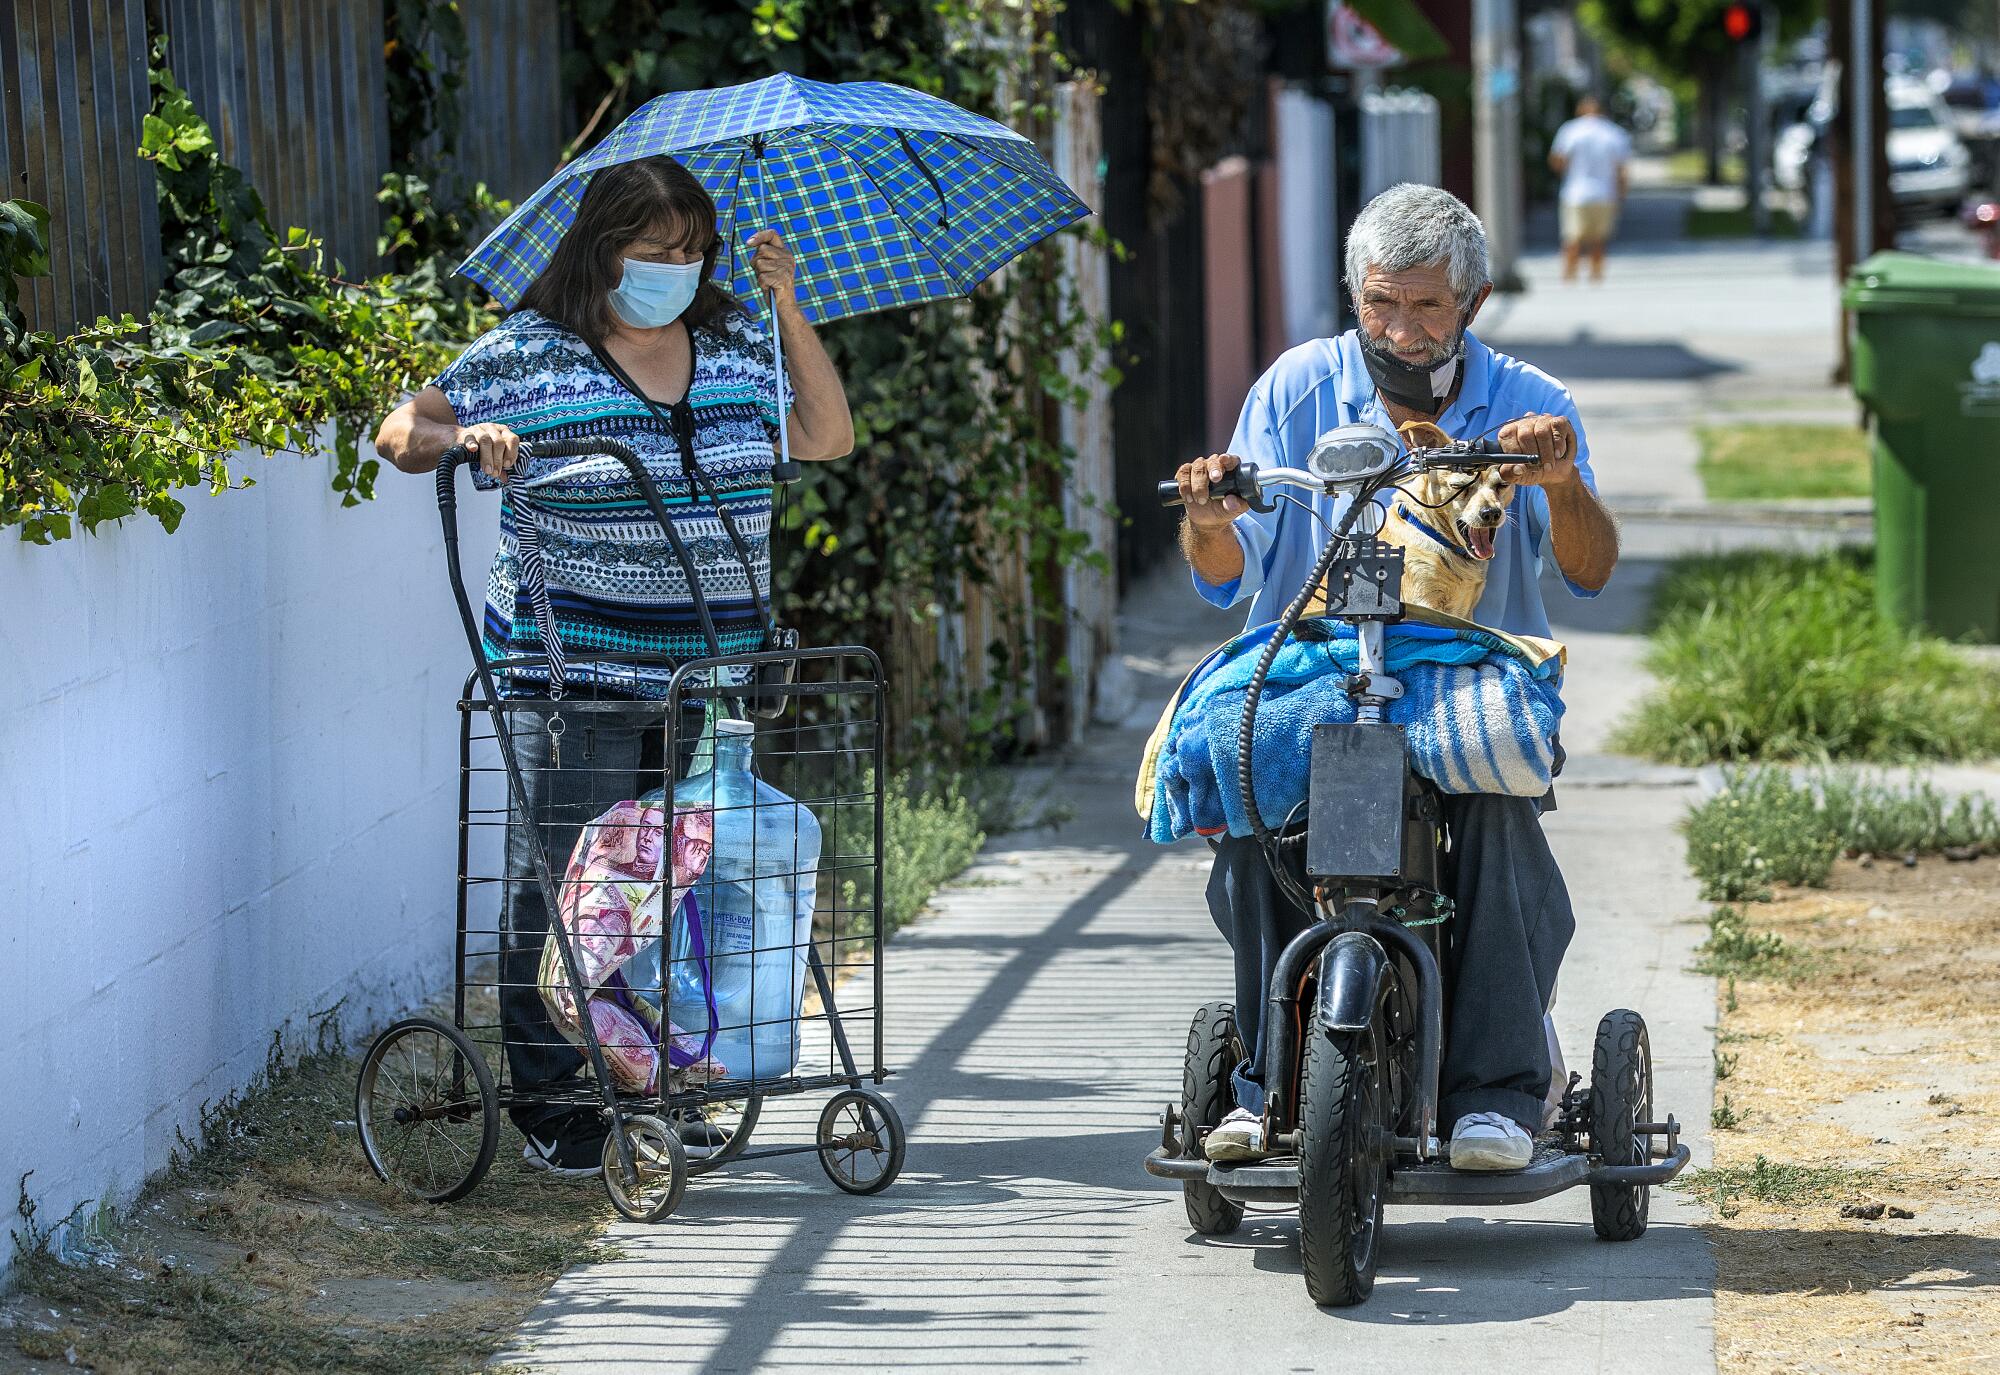 Augustine Hurtado rides his scooter along Central Avenue in Los Angeles with his dog, Sparky.